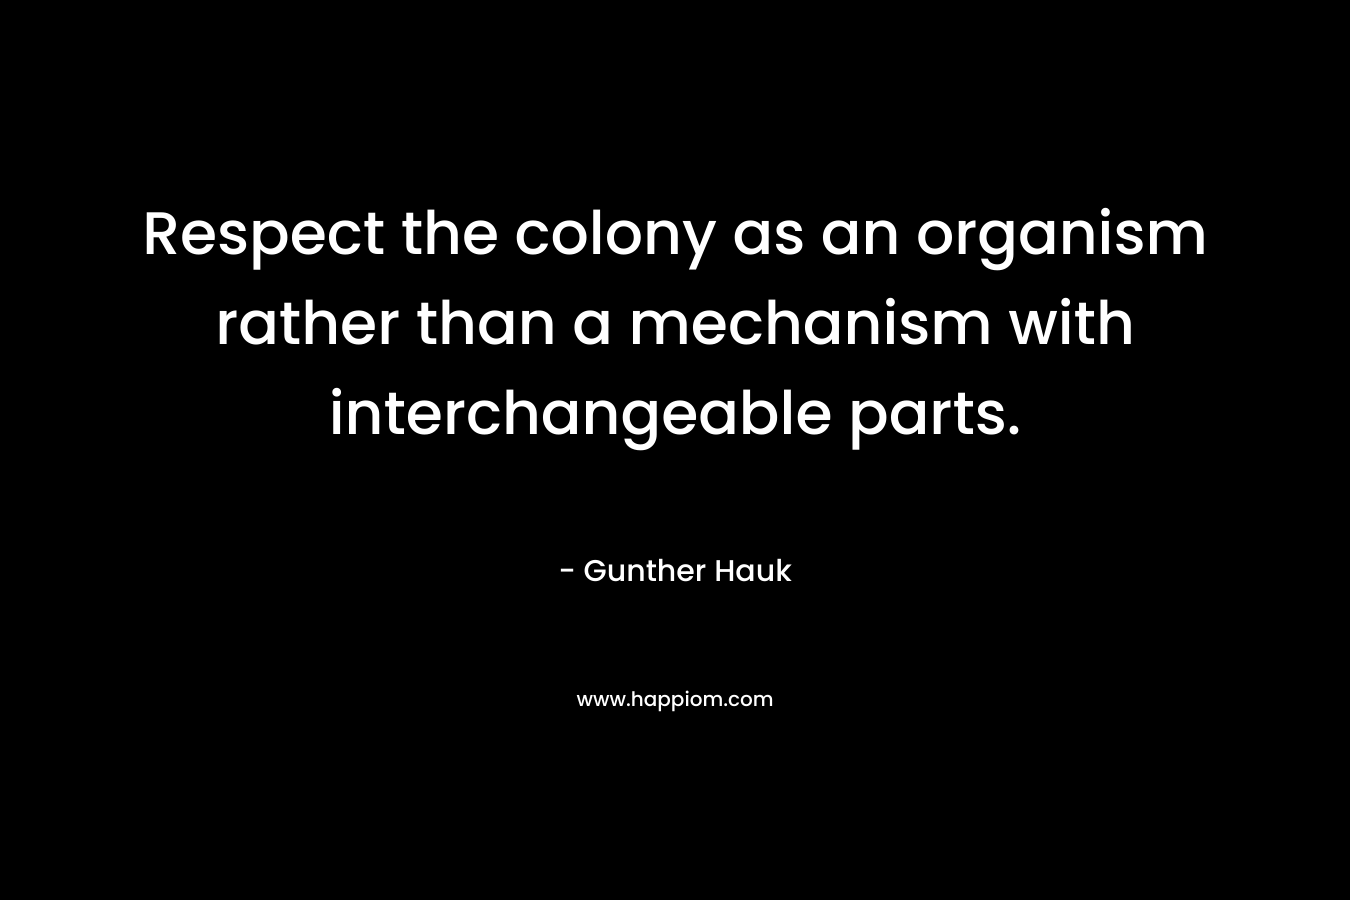 Respect the colony as an organism rather than a mechanism with interchangeable parts. – Gunther Hauk